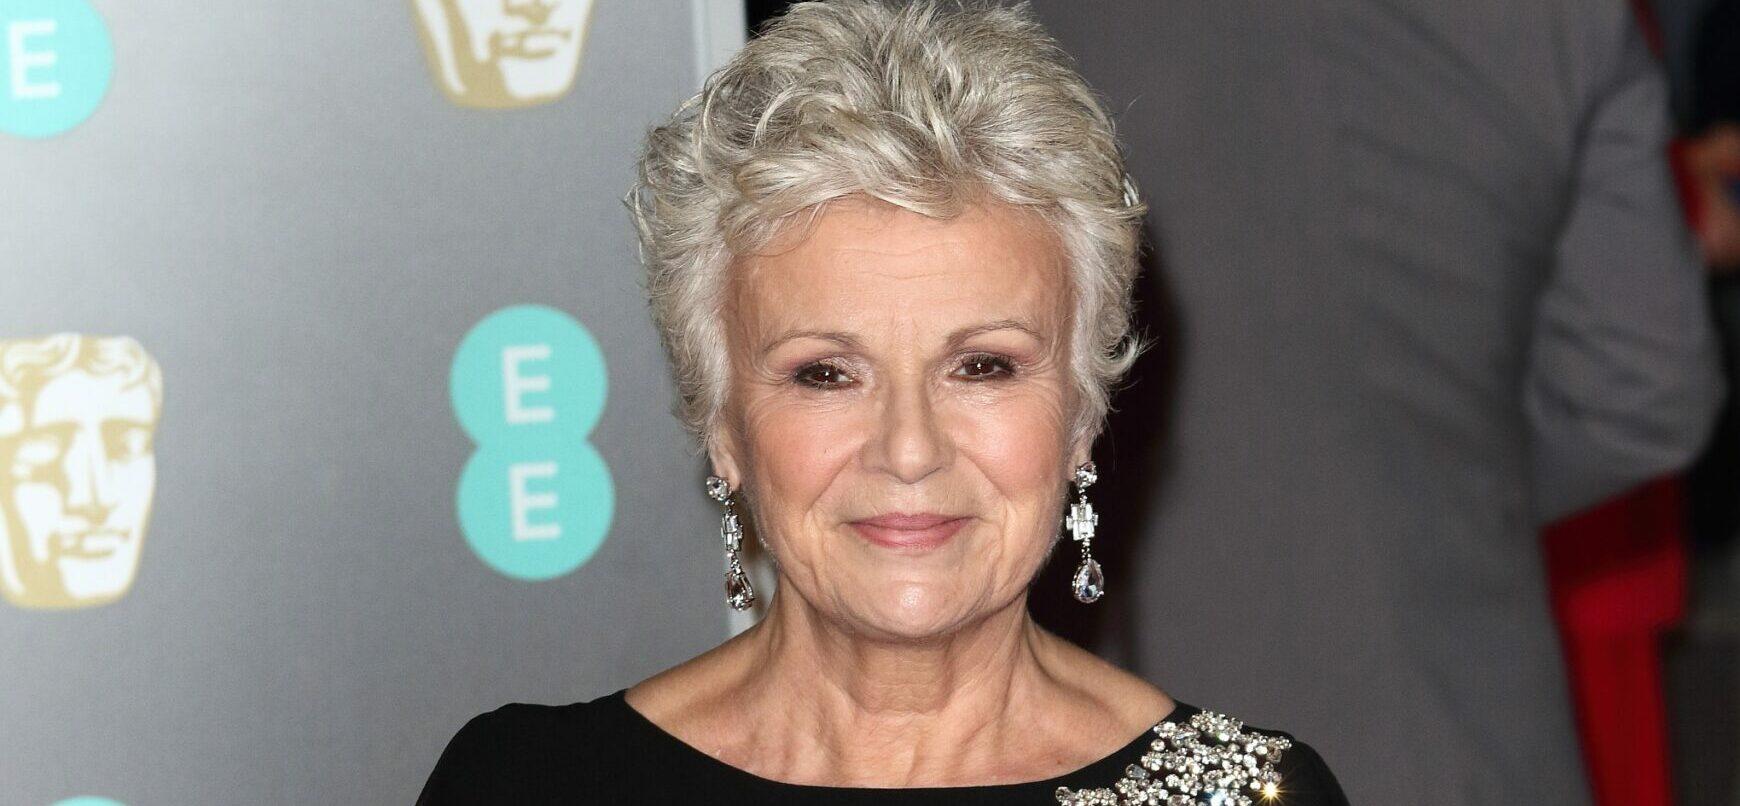 Julie Walters at the EE British Academy Film Awards - Red Carpet Arrivals